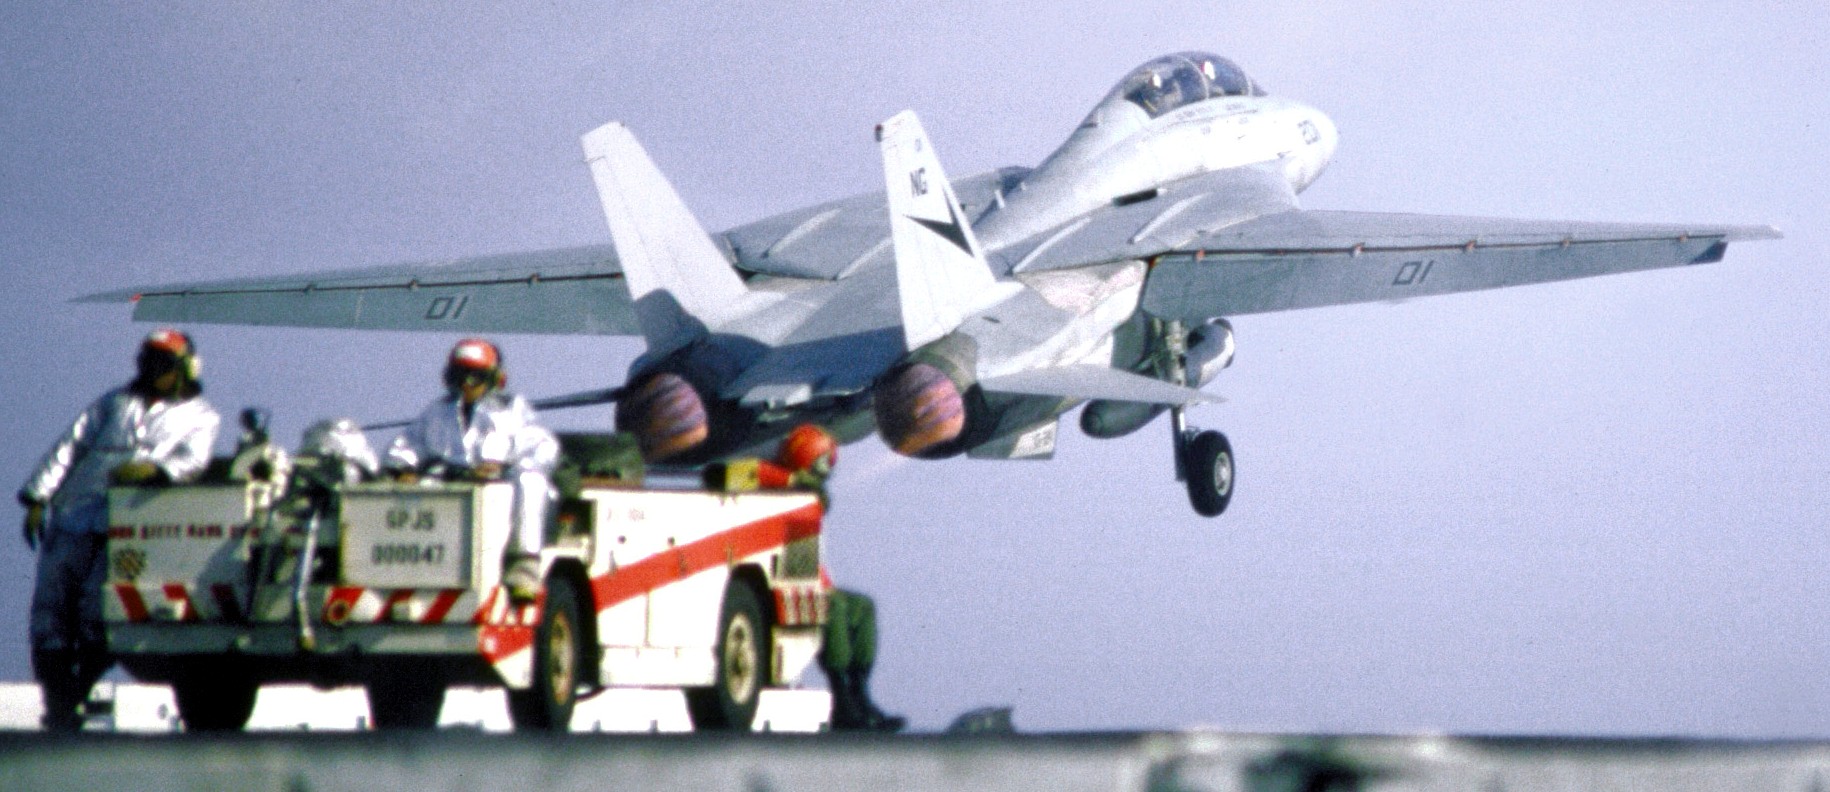 vf-24 fighting renegades fighter squadron navy f-14a tomcat carrier air wing cvw-9 uss kitty hawk cv-63 07